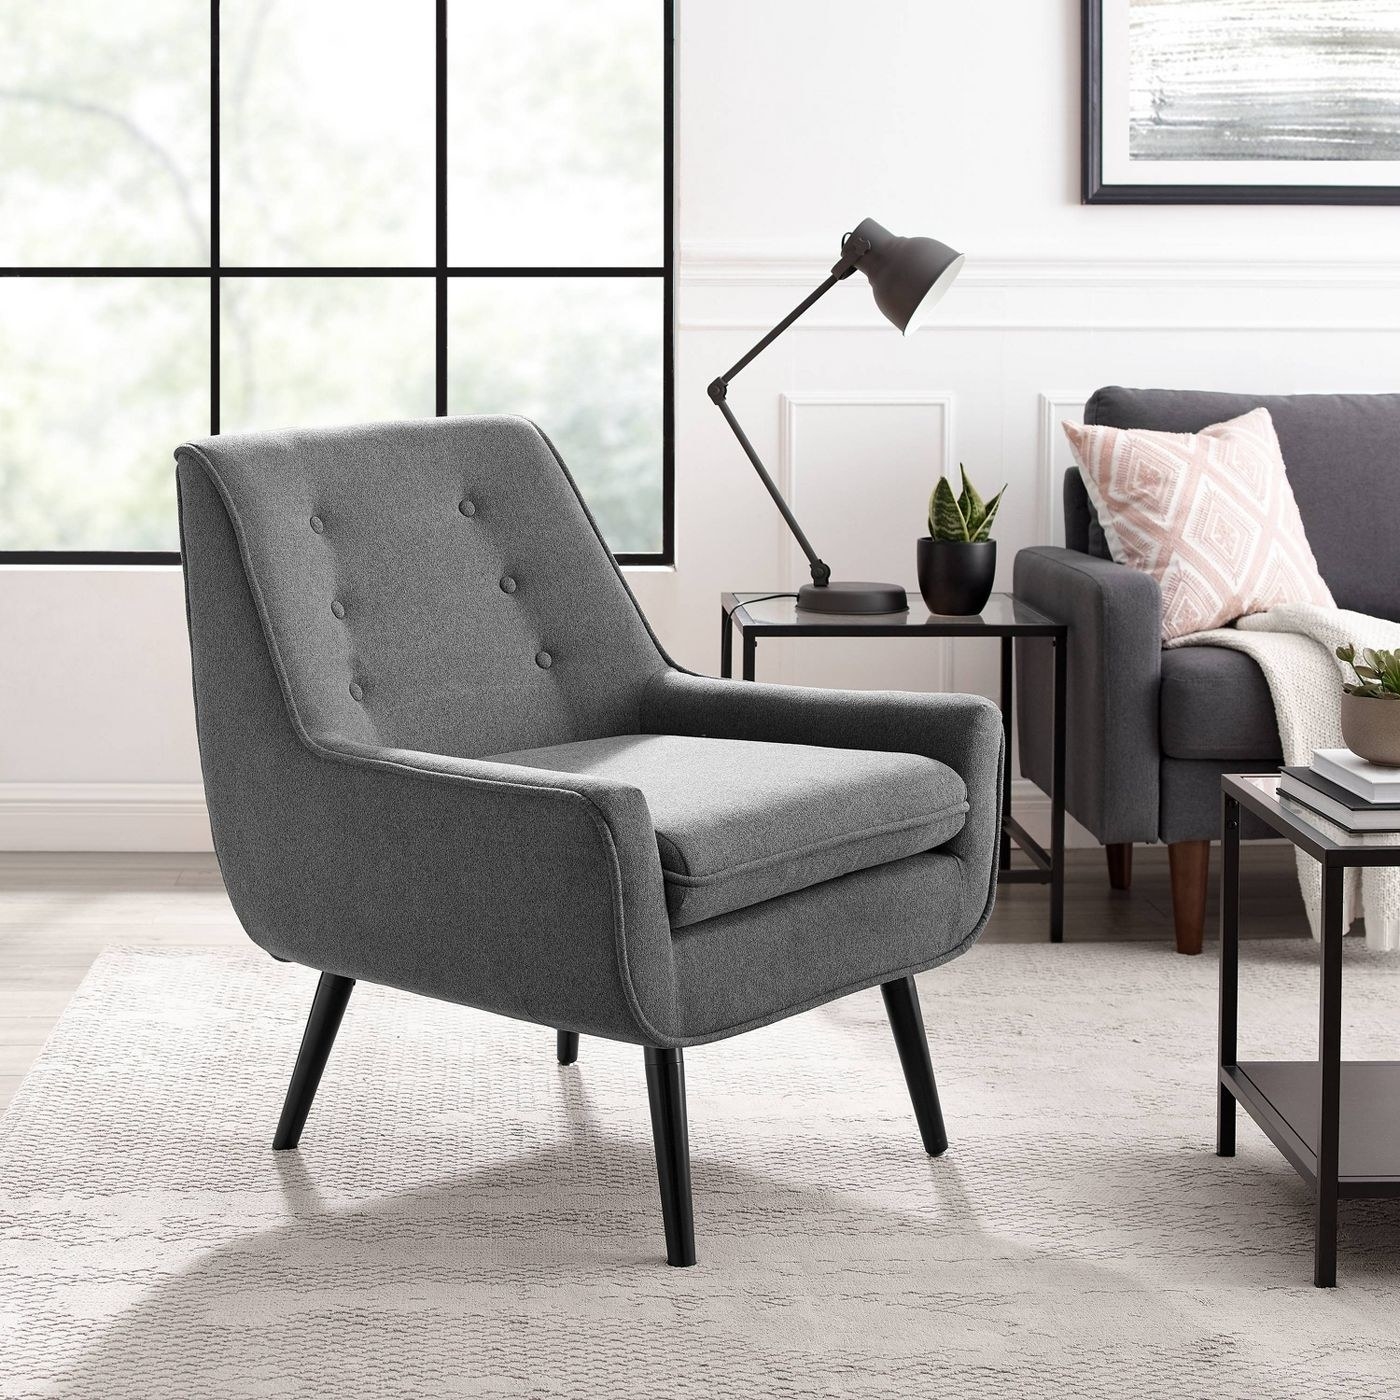 A tufted gray chair in a living room